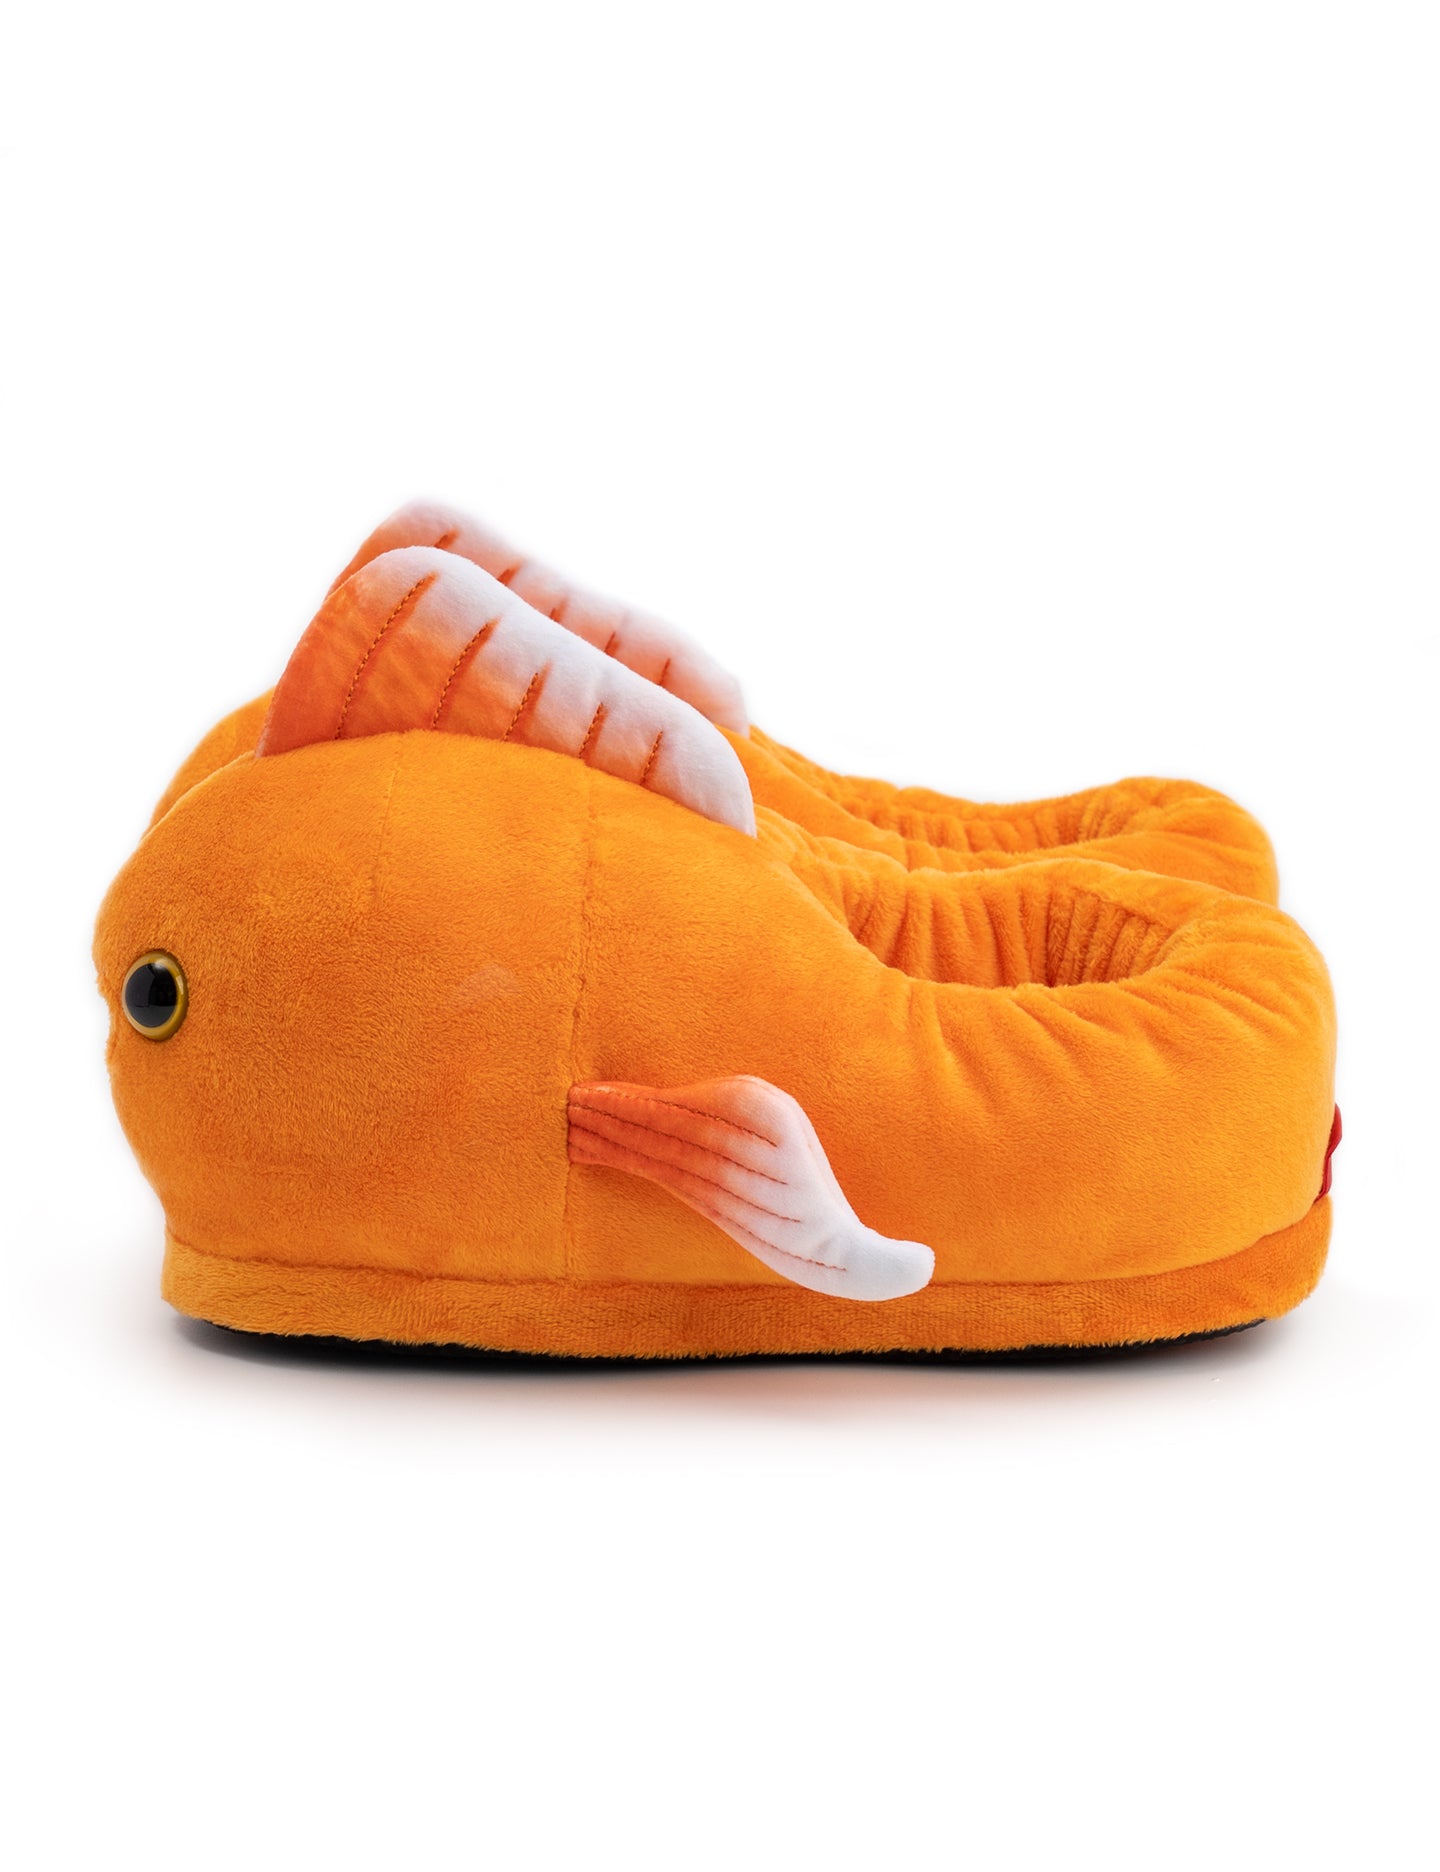 Hecklefish Slippers - Small